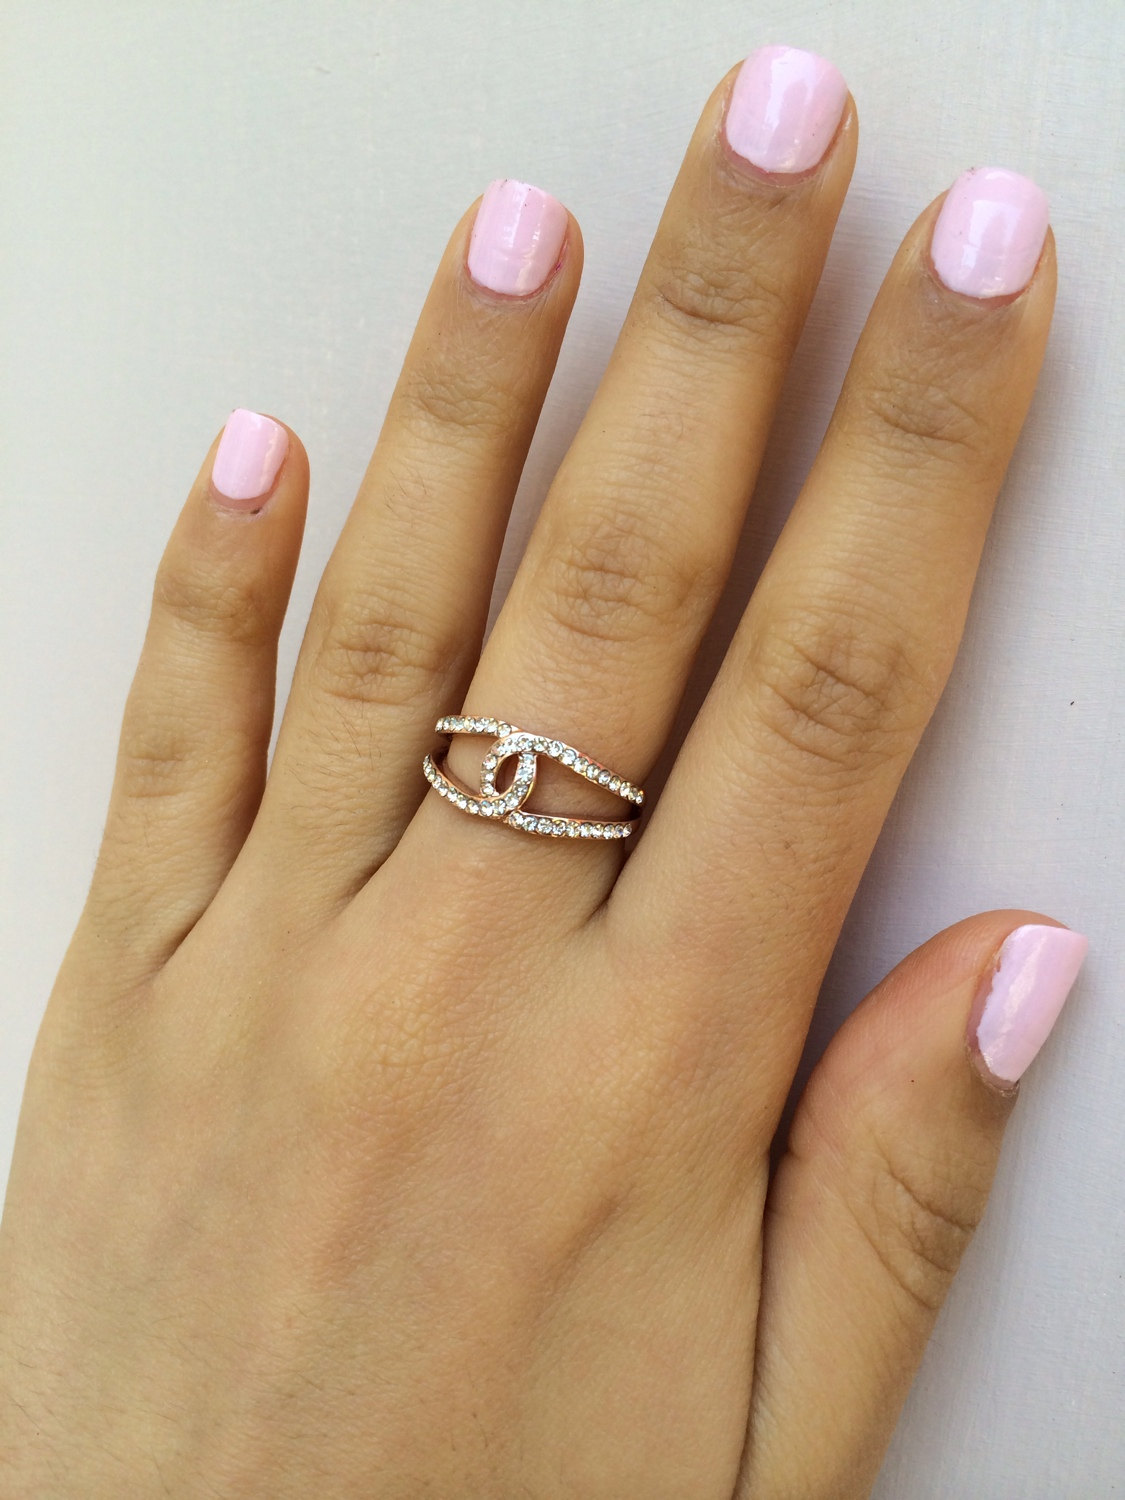 Rouelle Ella 18kt Karat Rose Or White Gold Plated Twist Ring: Dainty Stack, Midi, Above The Knuckle Rings.